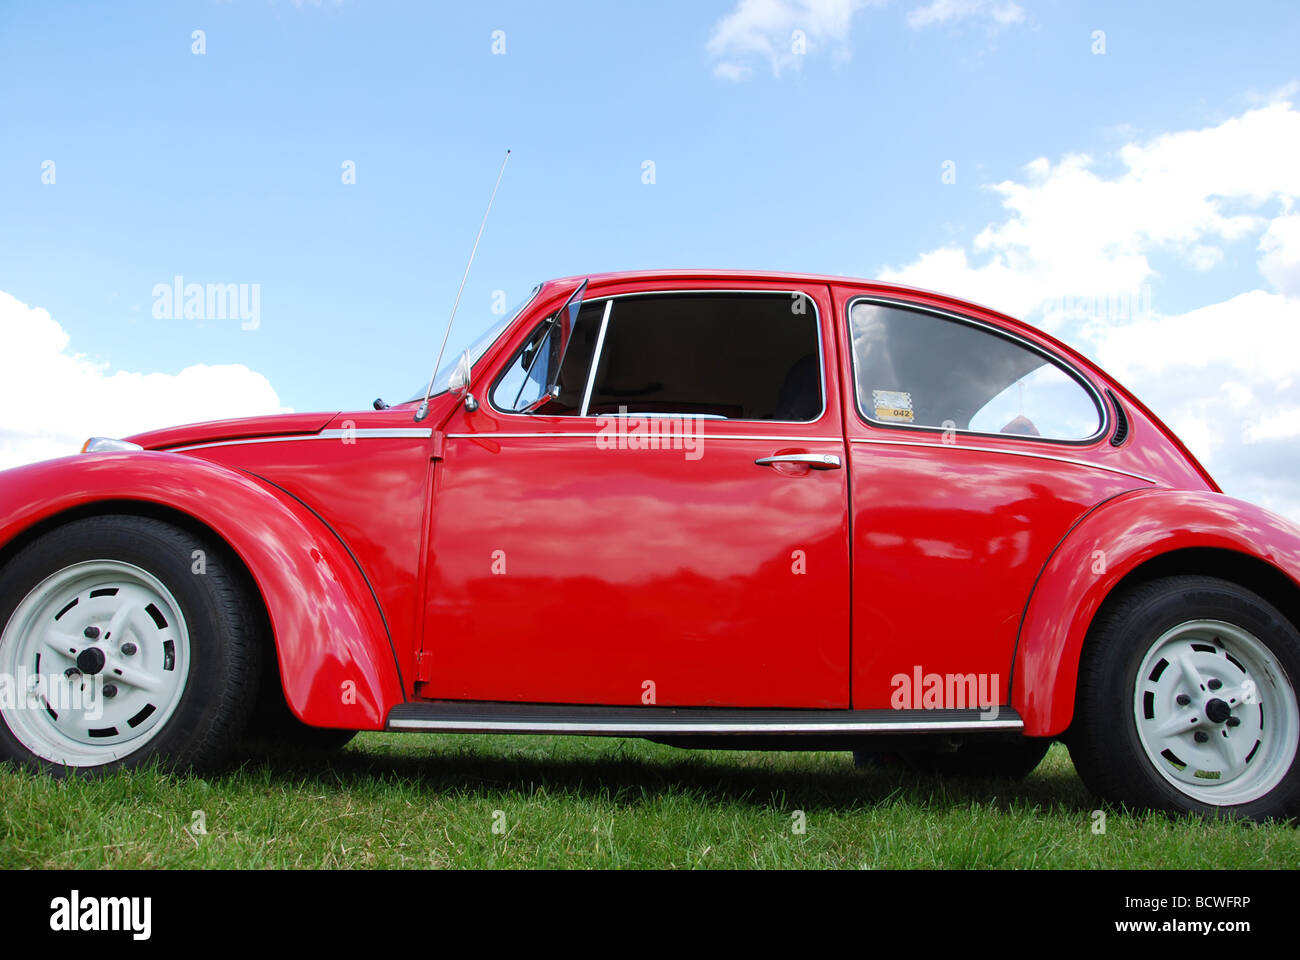 Classic red VW beetle against blue skies Stock Photo